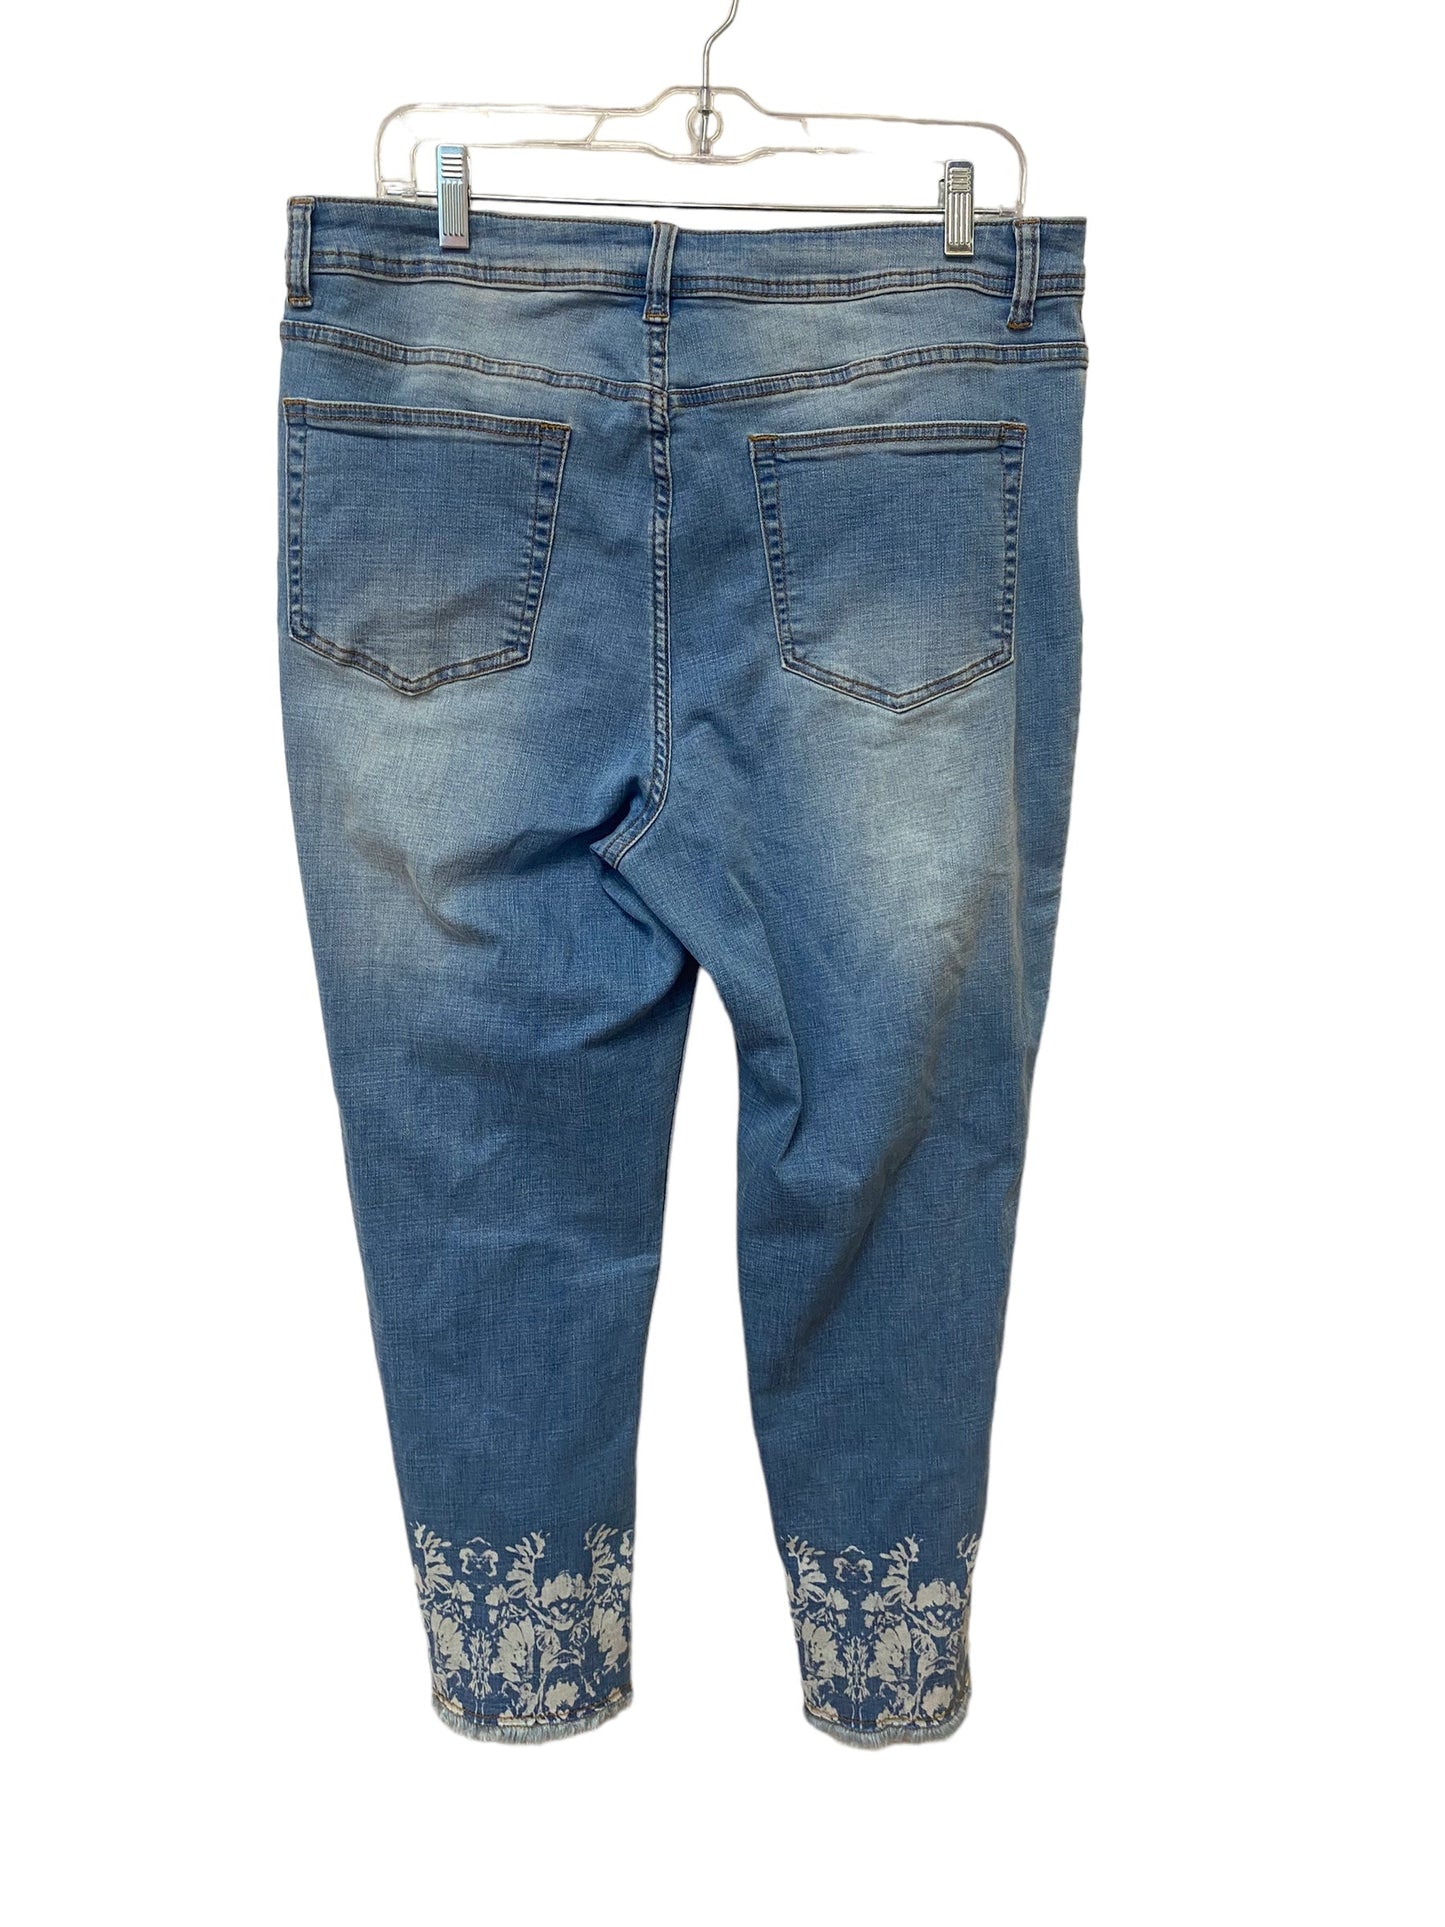 Jeans Flared By John Mark  Size: 14